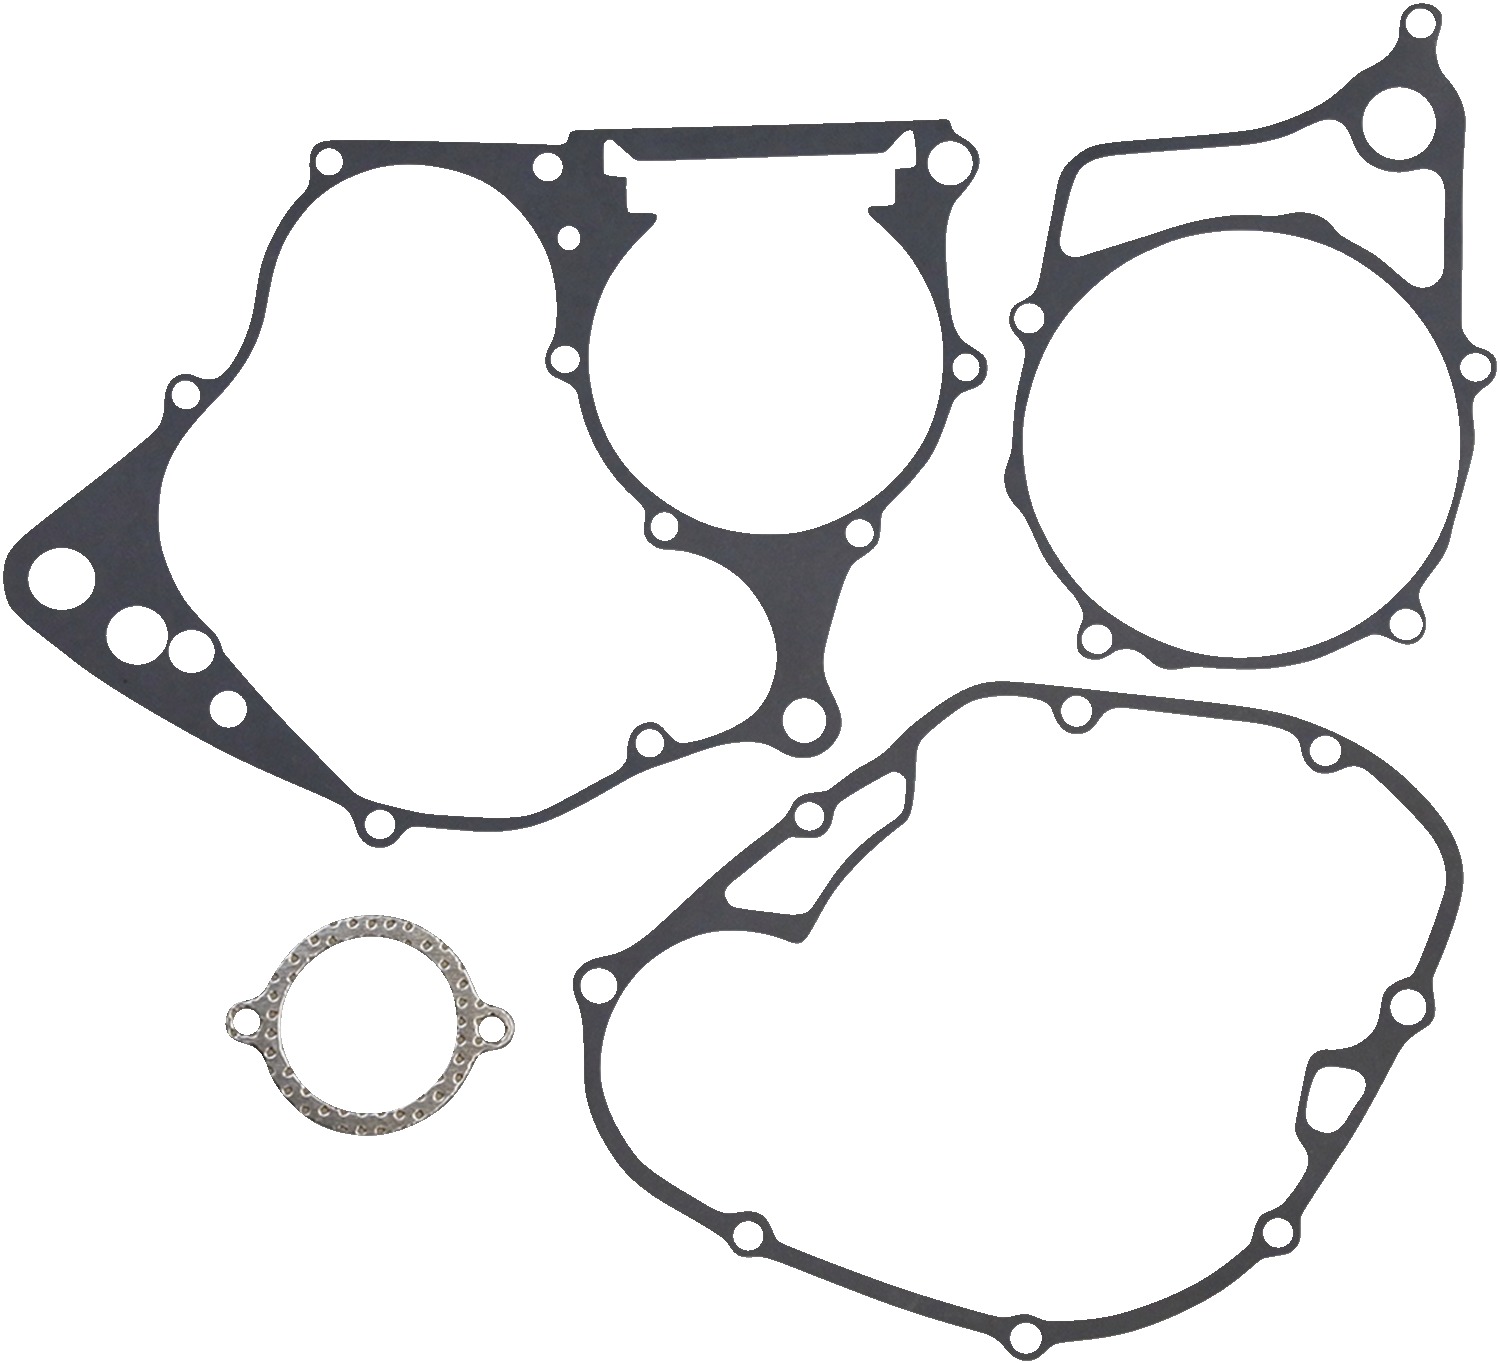 Lower Engine Gasket Kit - For 1980 Honda CR125 - Click Image to Close